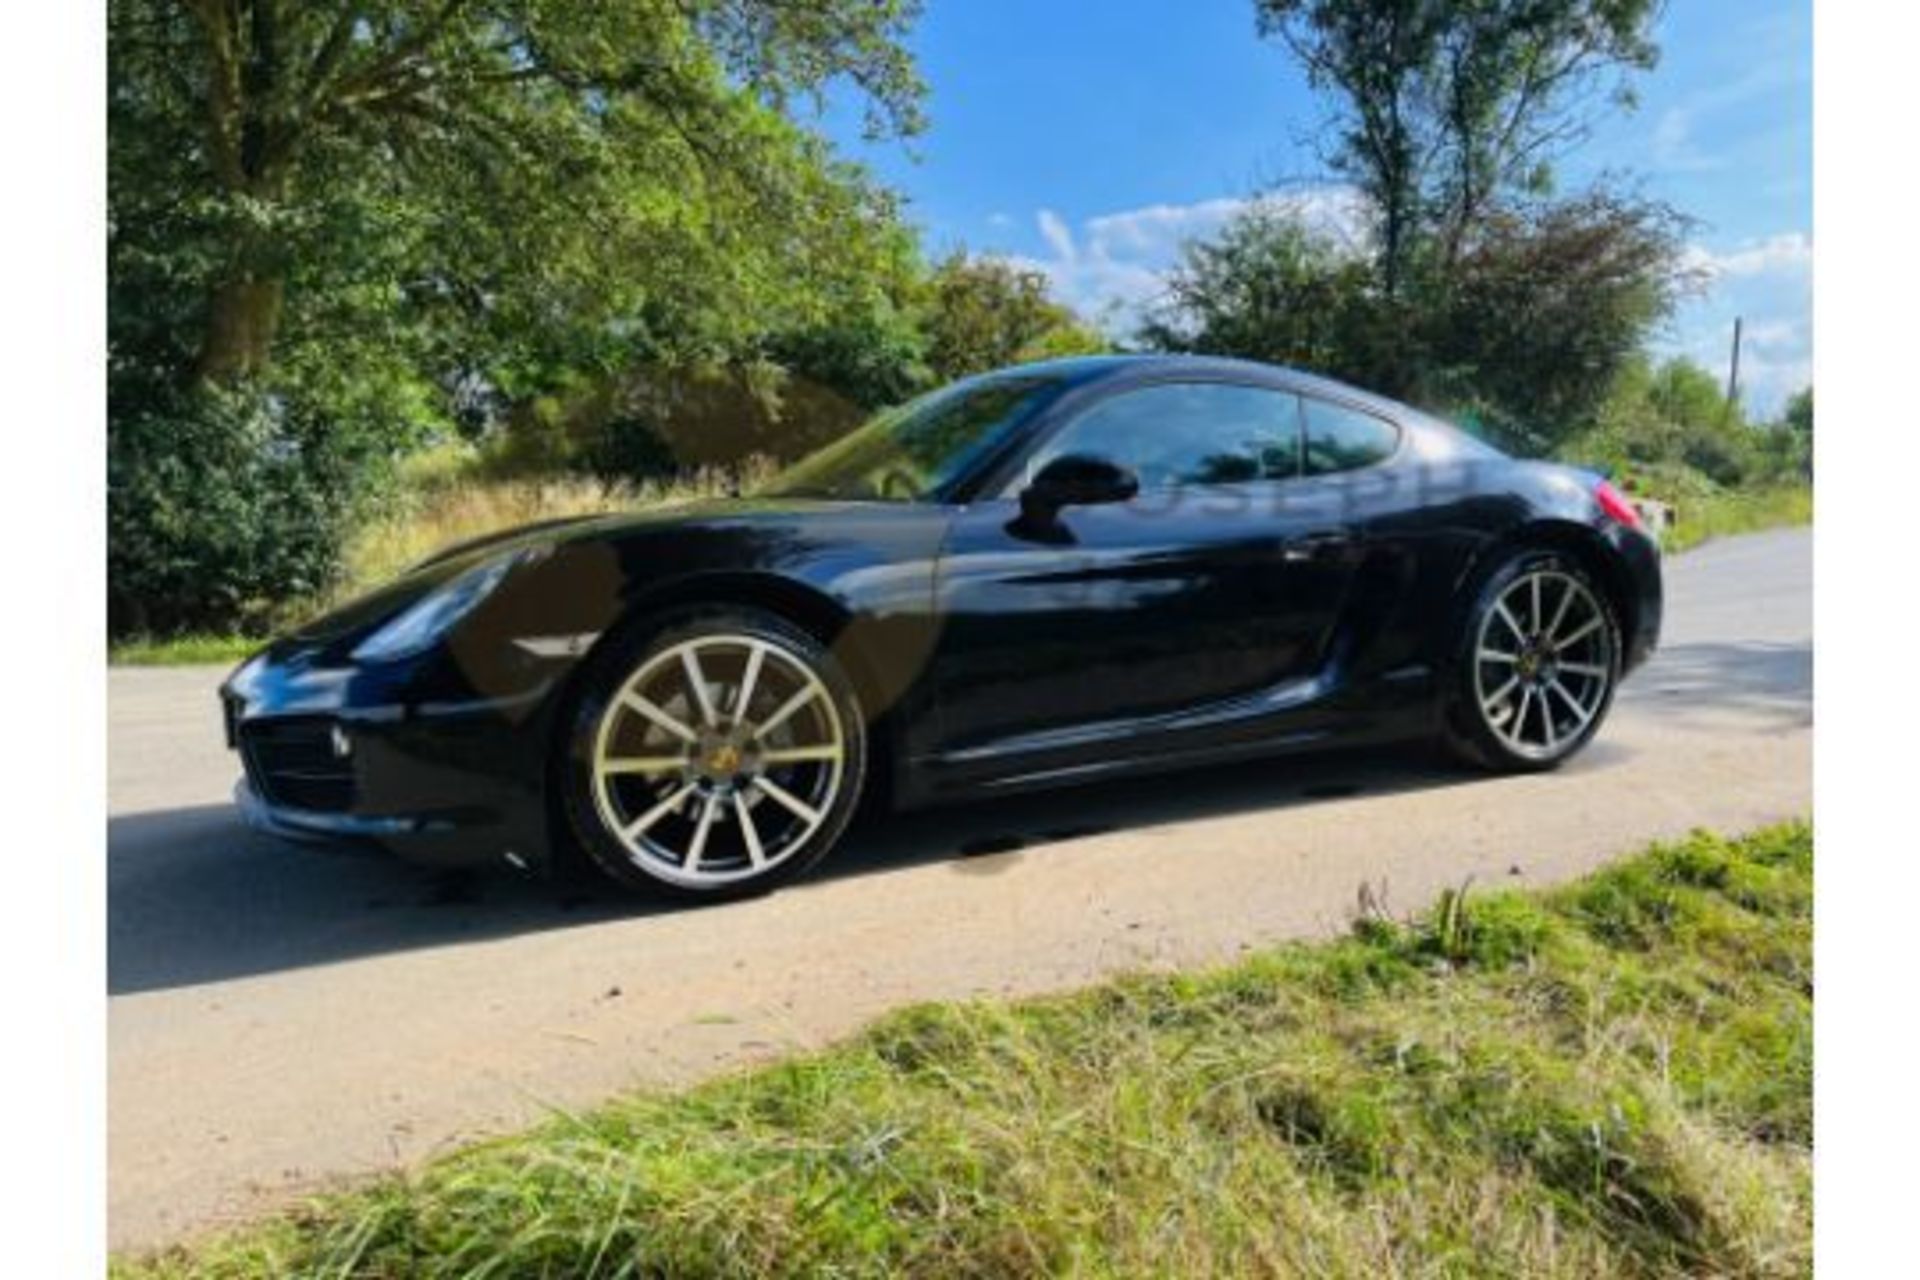 PORSCHE CAYMAN S-A *COUPE* (2016 - NEW MODEL) '2.7 PETROL - PDK AUTO' (FULL SERVICE HISTORY) *WOW* - Image 7 of 33